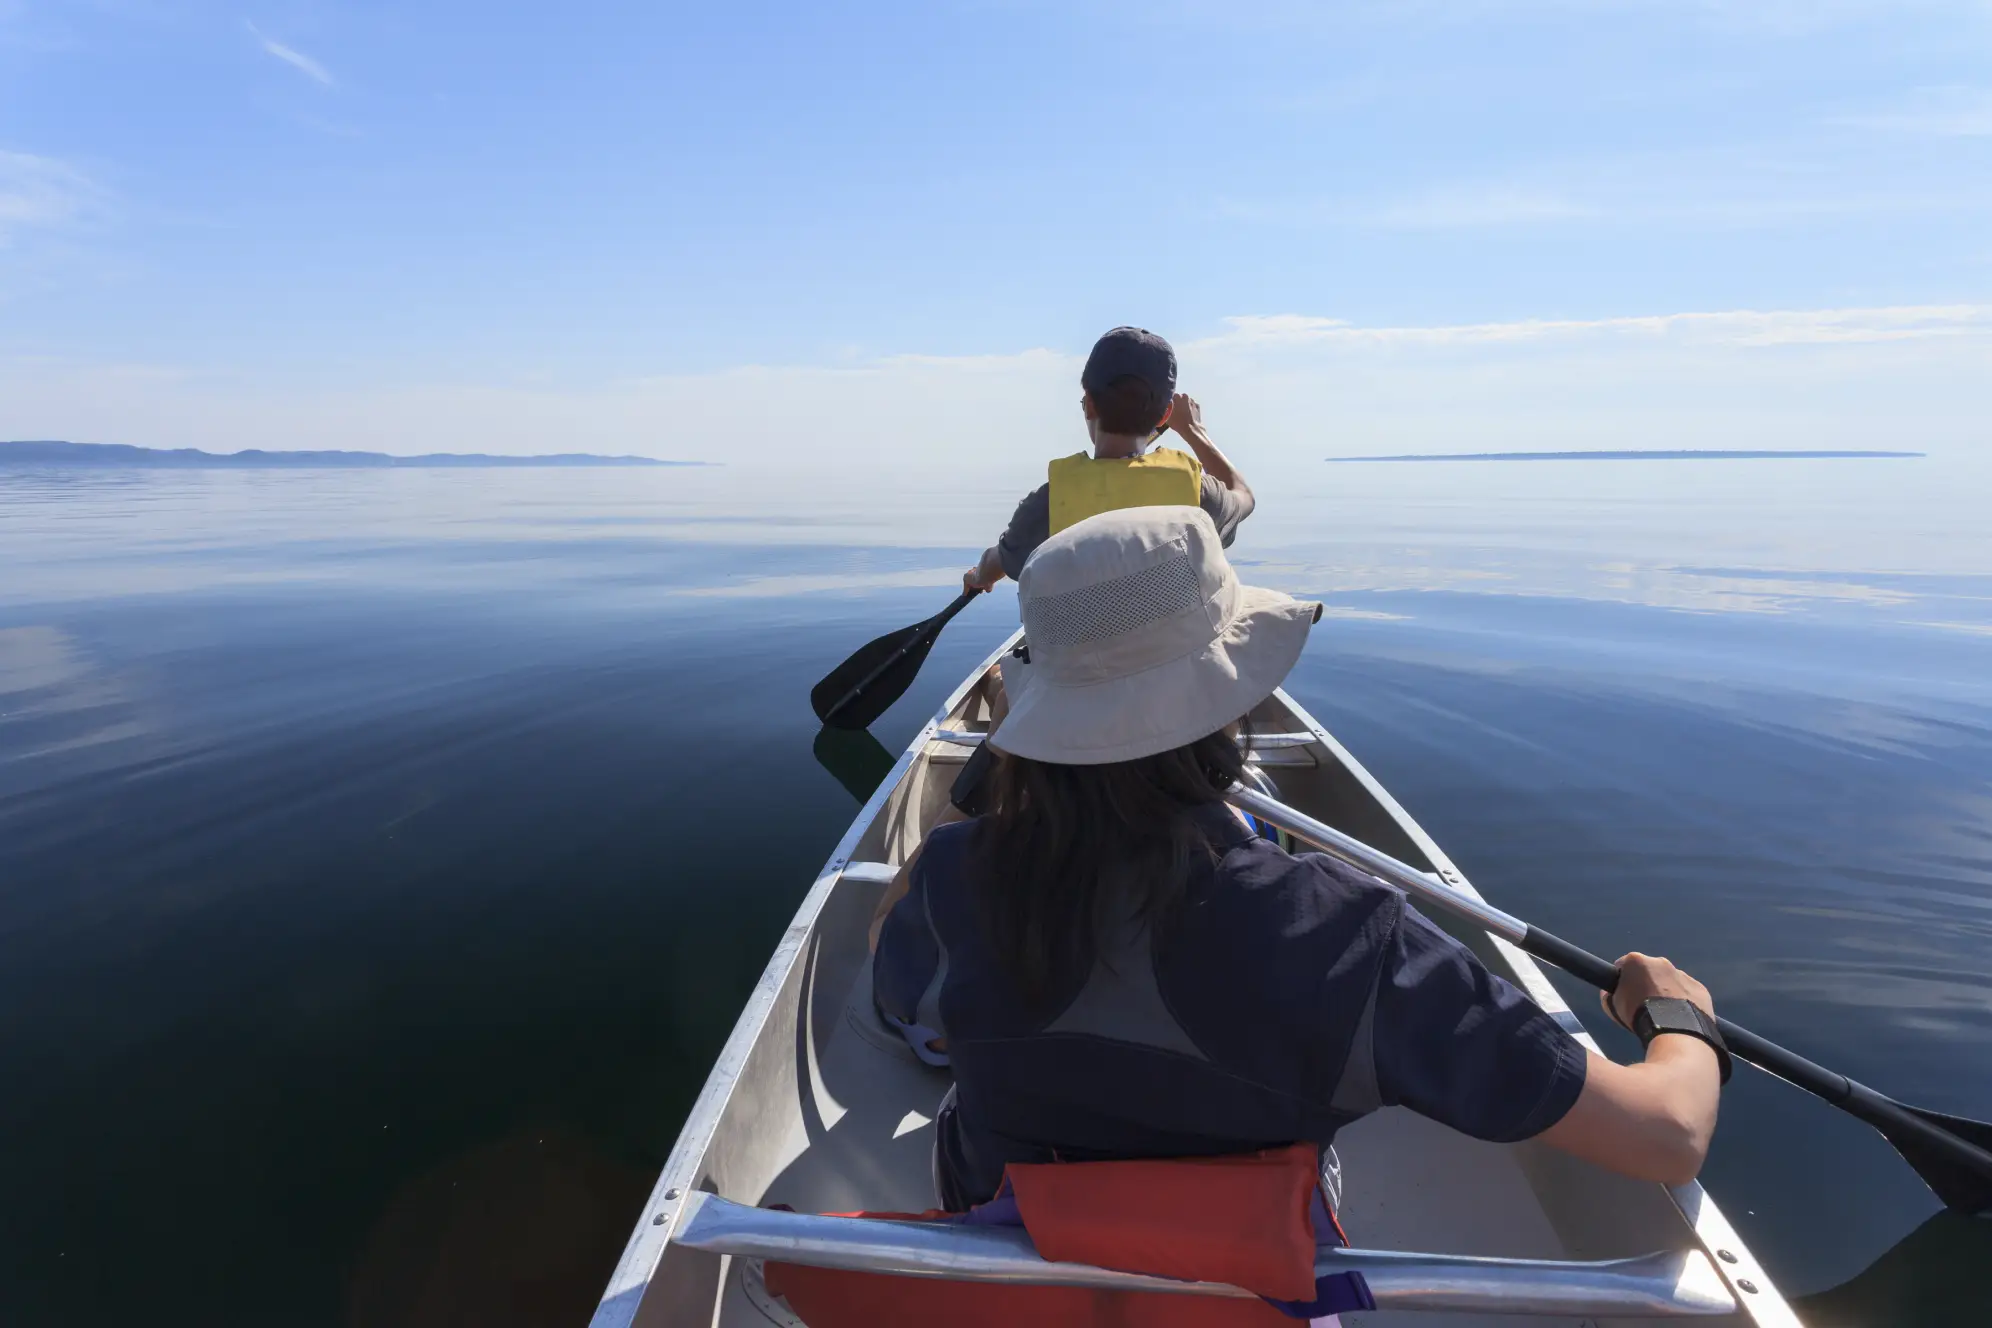 Two people paddling in a canoe on a calm lake with a bright blue sky up ahead